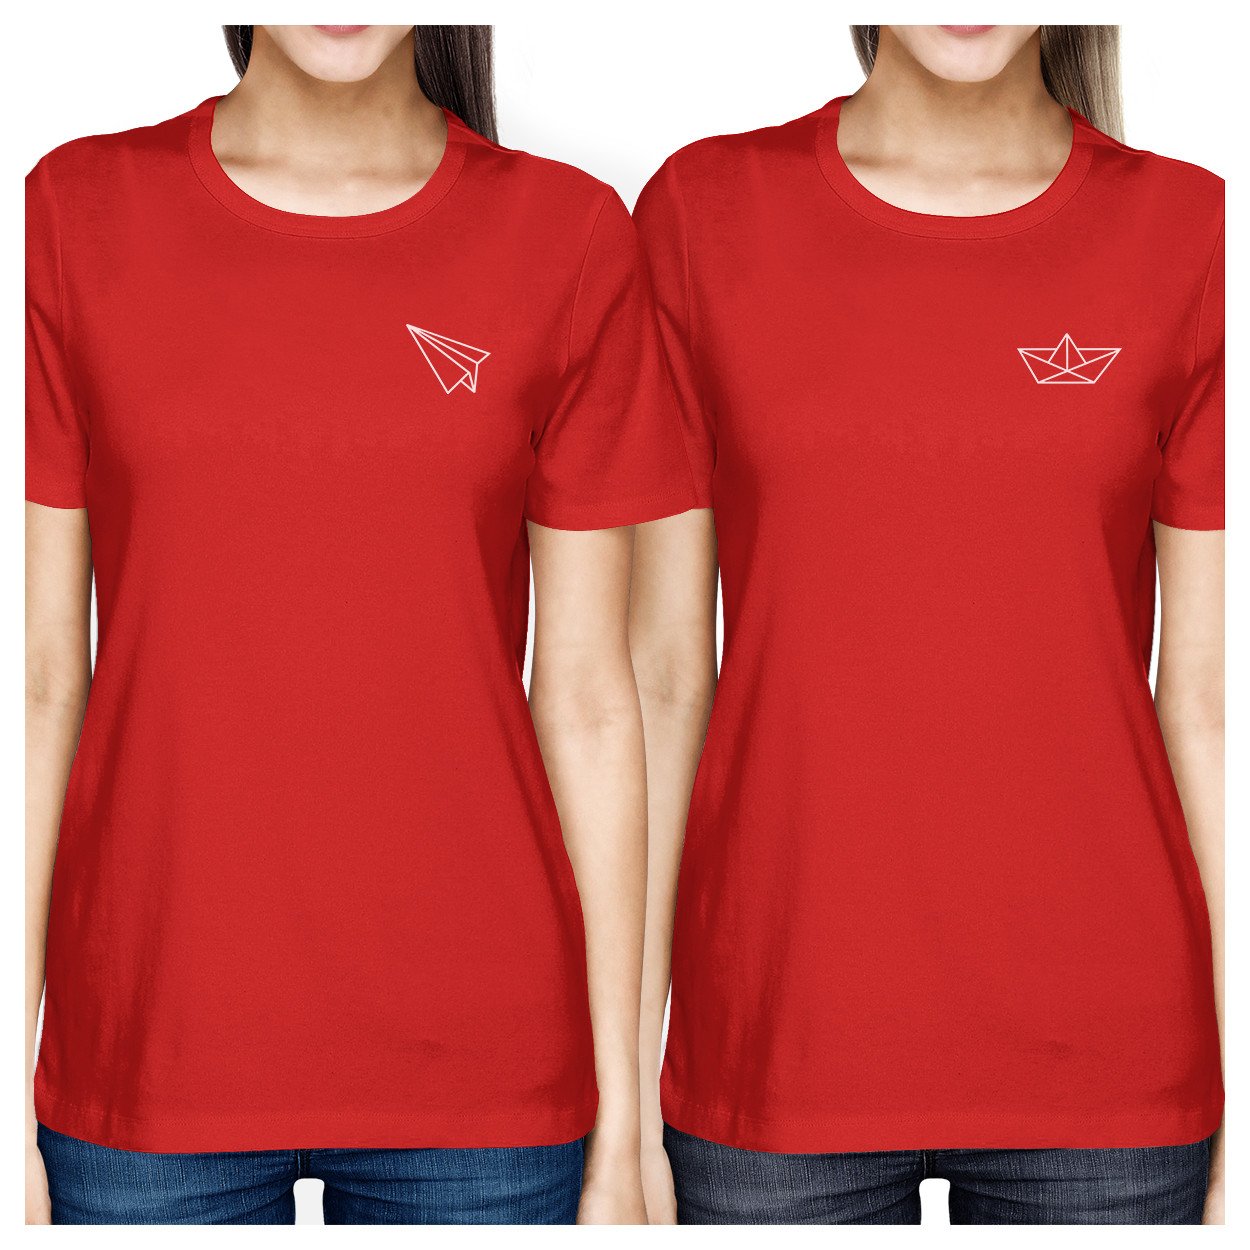 Origami Plane And Boat BFF Matching Red Shirts